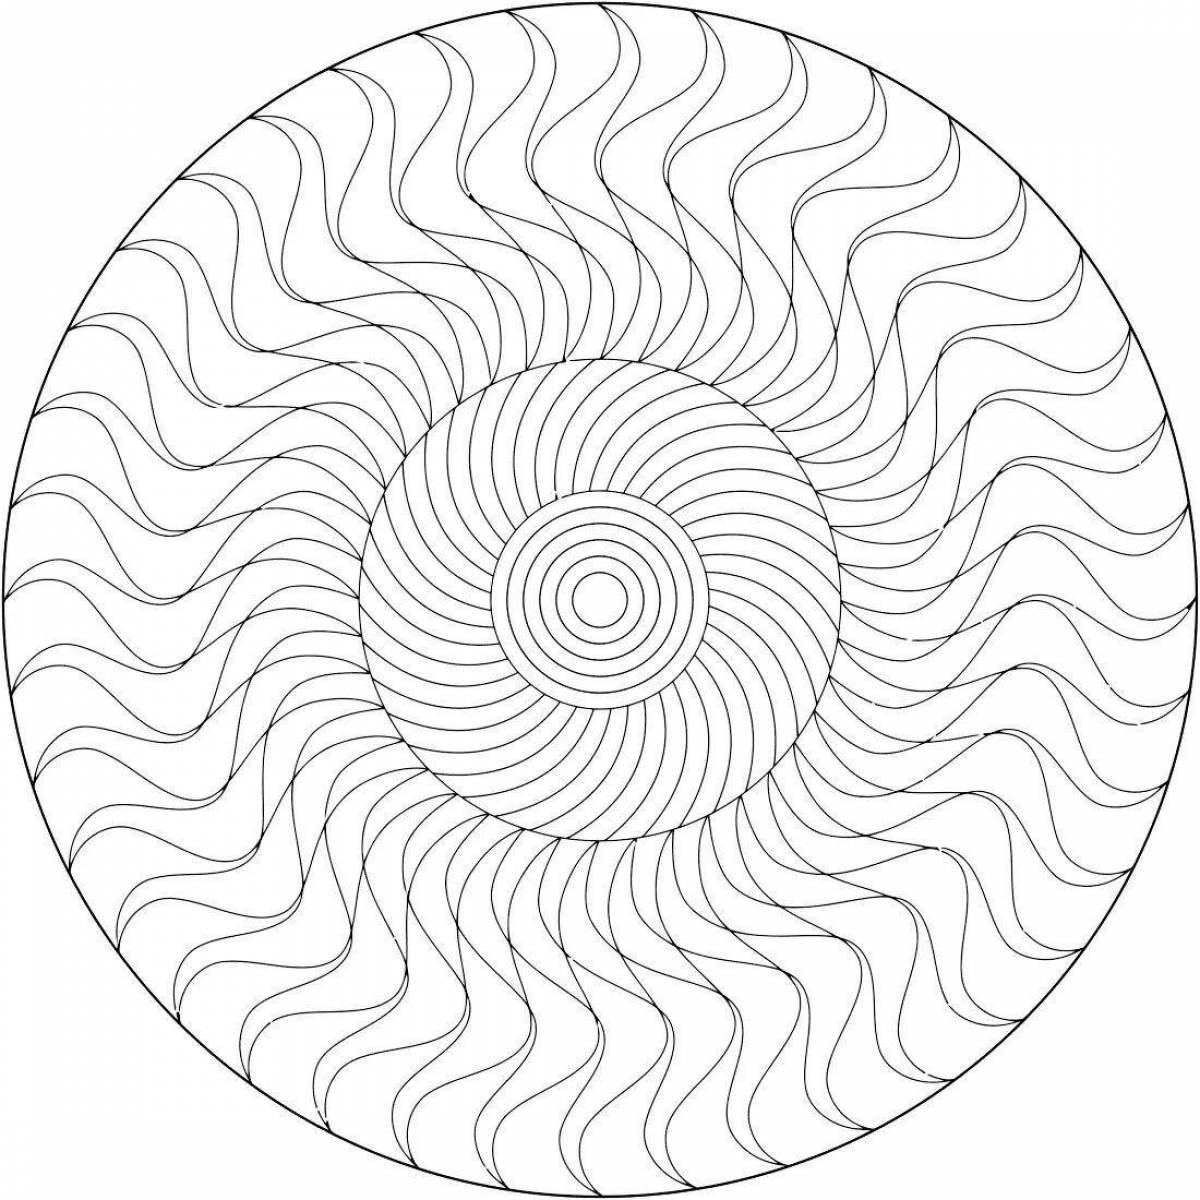 A sketch of a portrait with a luminous spiral